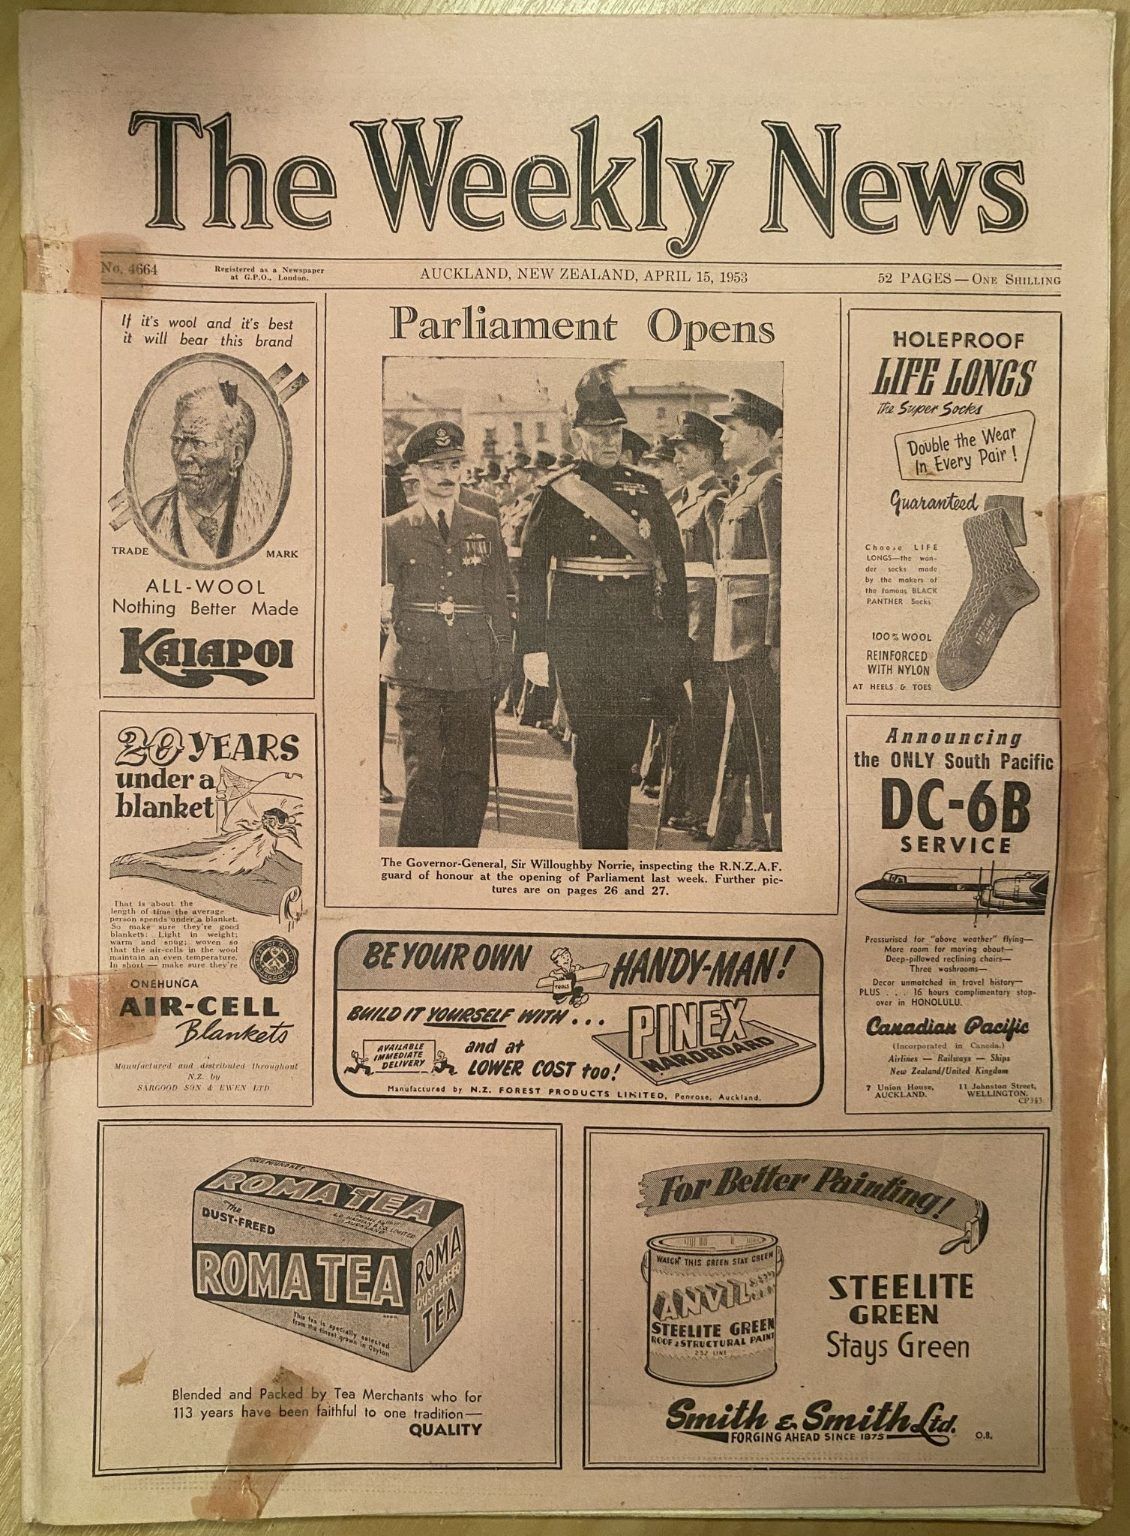 OLD NEWSPAPER: The Weekly News - No. 4664, 15 April 1953